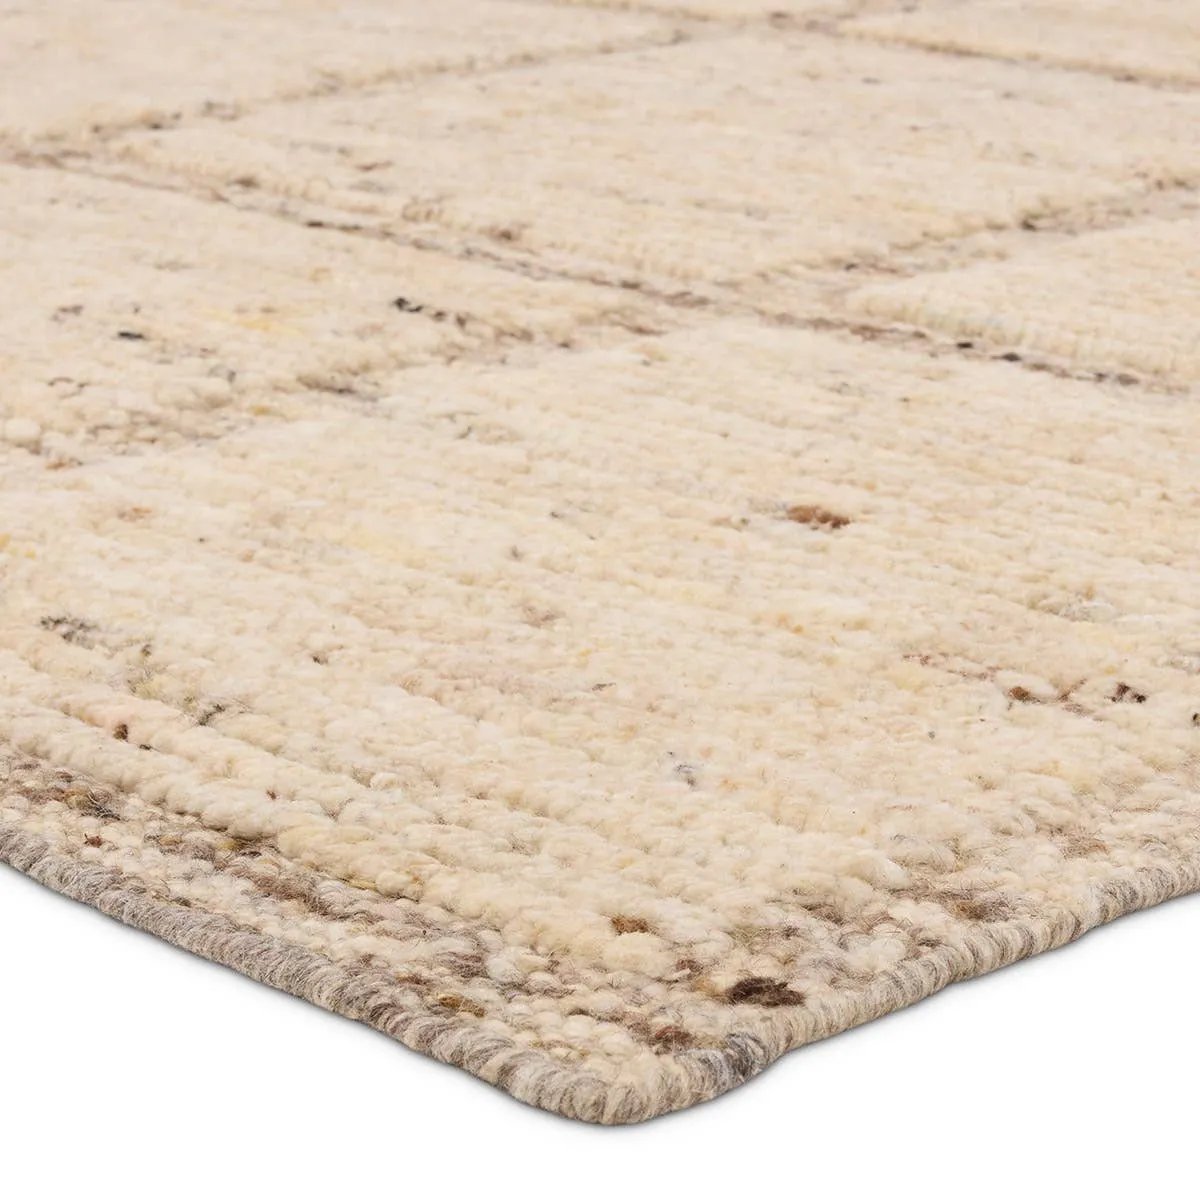 Subtle linear textures and natural colorways define the irresistible quality of the Seora Kizza. The Kizza area rug features a linear grid for an intriguing dose of modern appeal. The textural, wool pile contains no dye, reflecting the natural colors of the sheep, for a rich and grounding palette of cream, brown, gray, and flecks of black. Amethyst Home provides interior design, new home construction design consulting, vintage area rugs, and lighting in the Charlotte metro area.